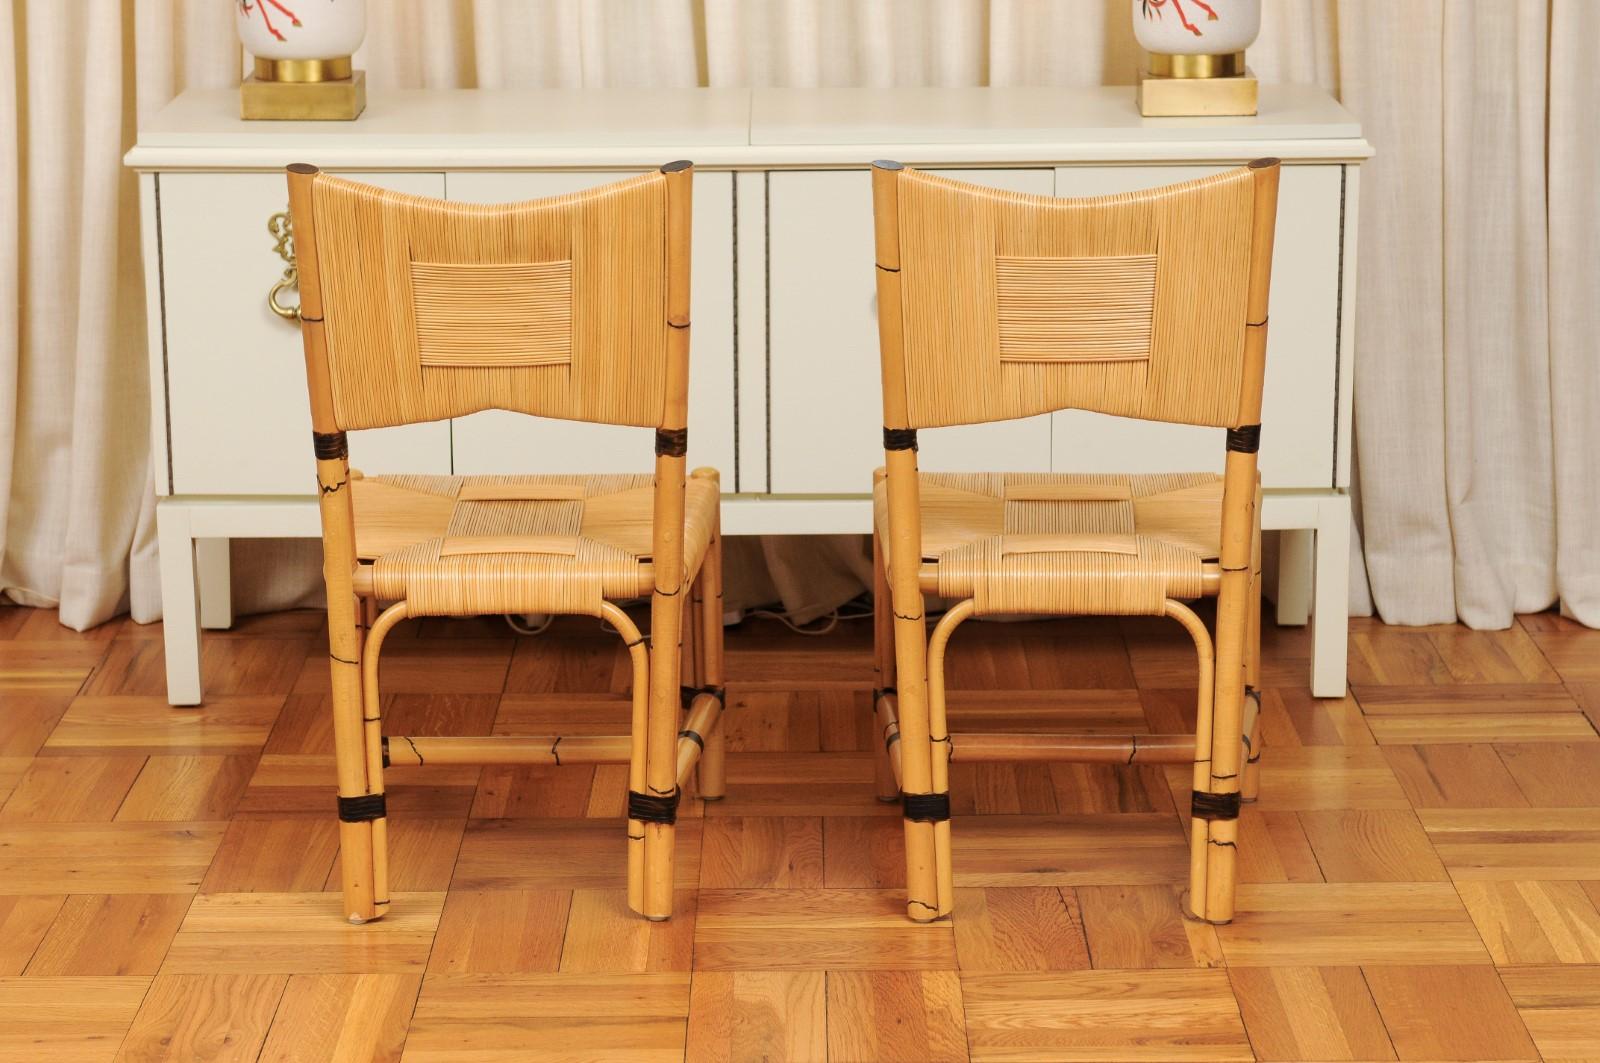 Superb Set of 8 Rush Rattan Dining Chairs by John Hutton for Donghia, circa 1995 For Sale 3